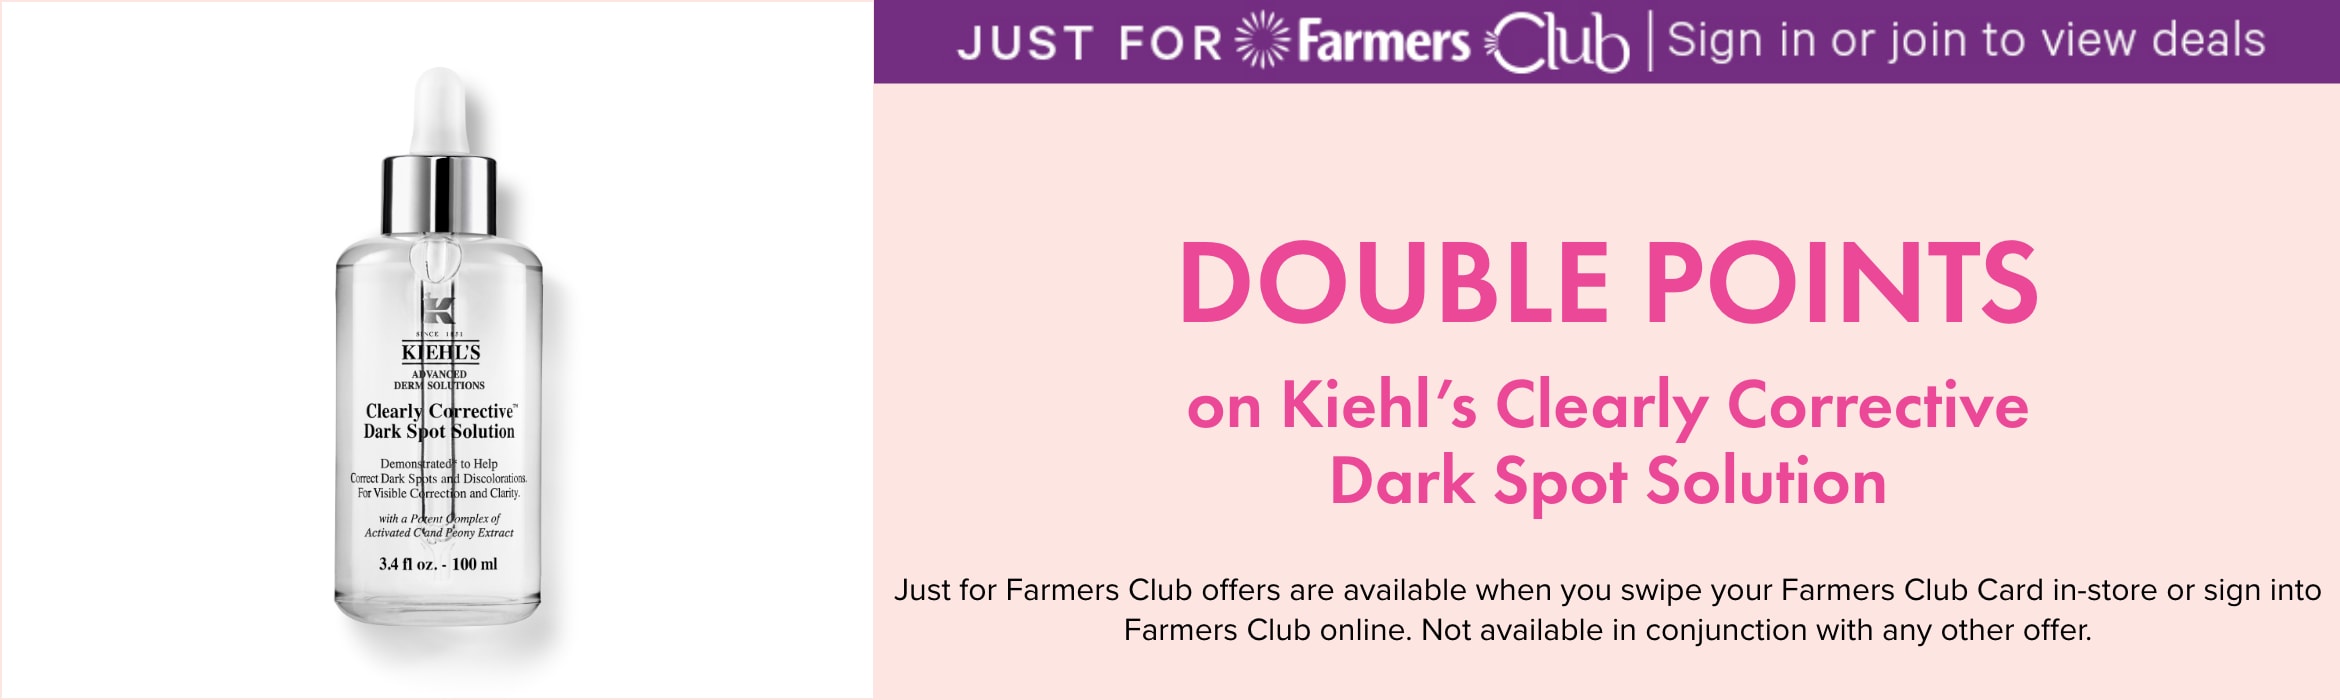 DOUBLE POINTS on Kiehl's Clearly Corrective Dark Spot Solution